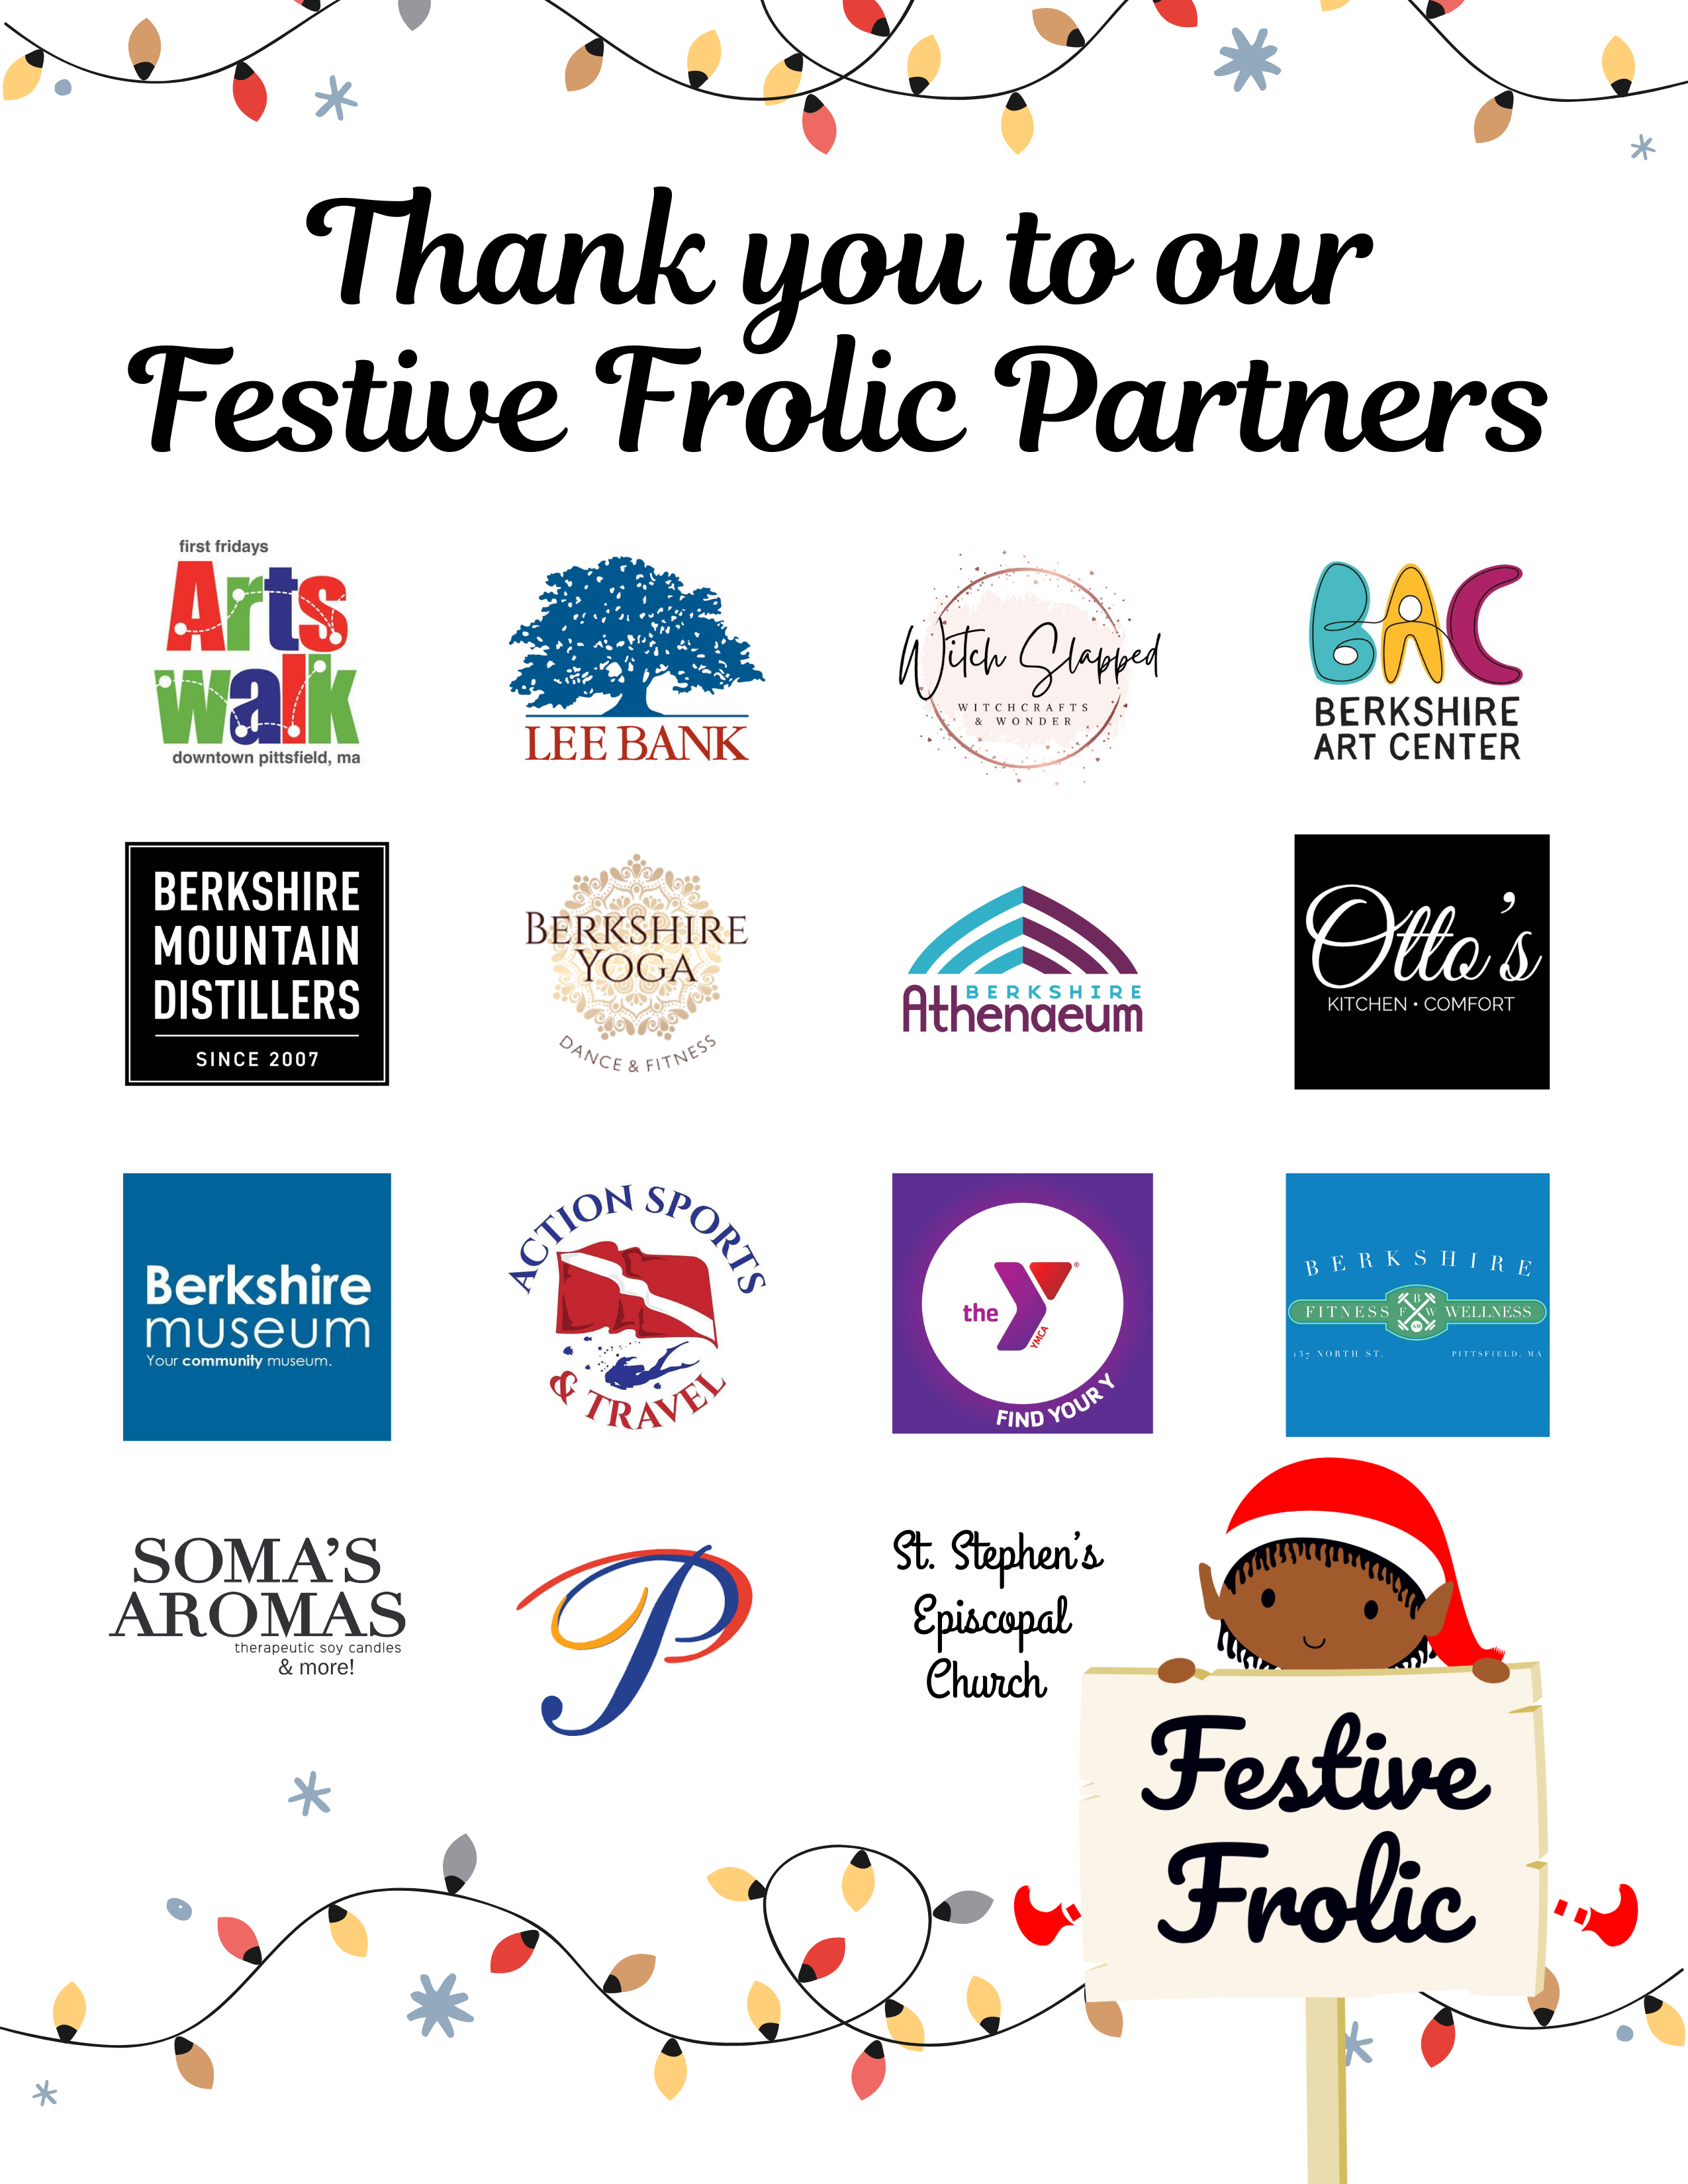 Thank you to our Festive Frolic Sponsors